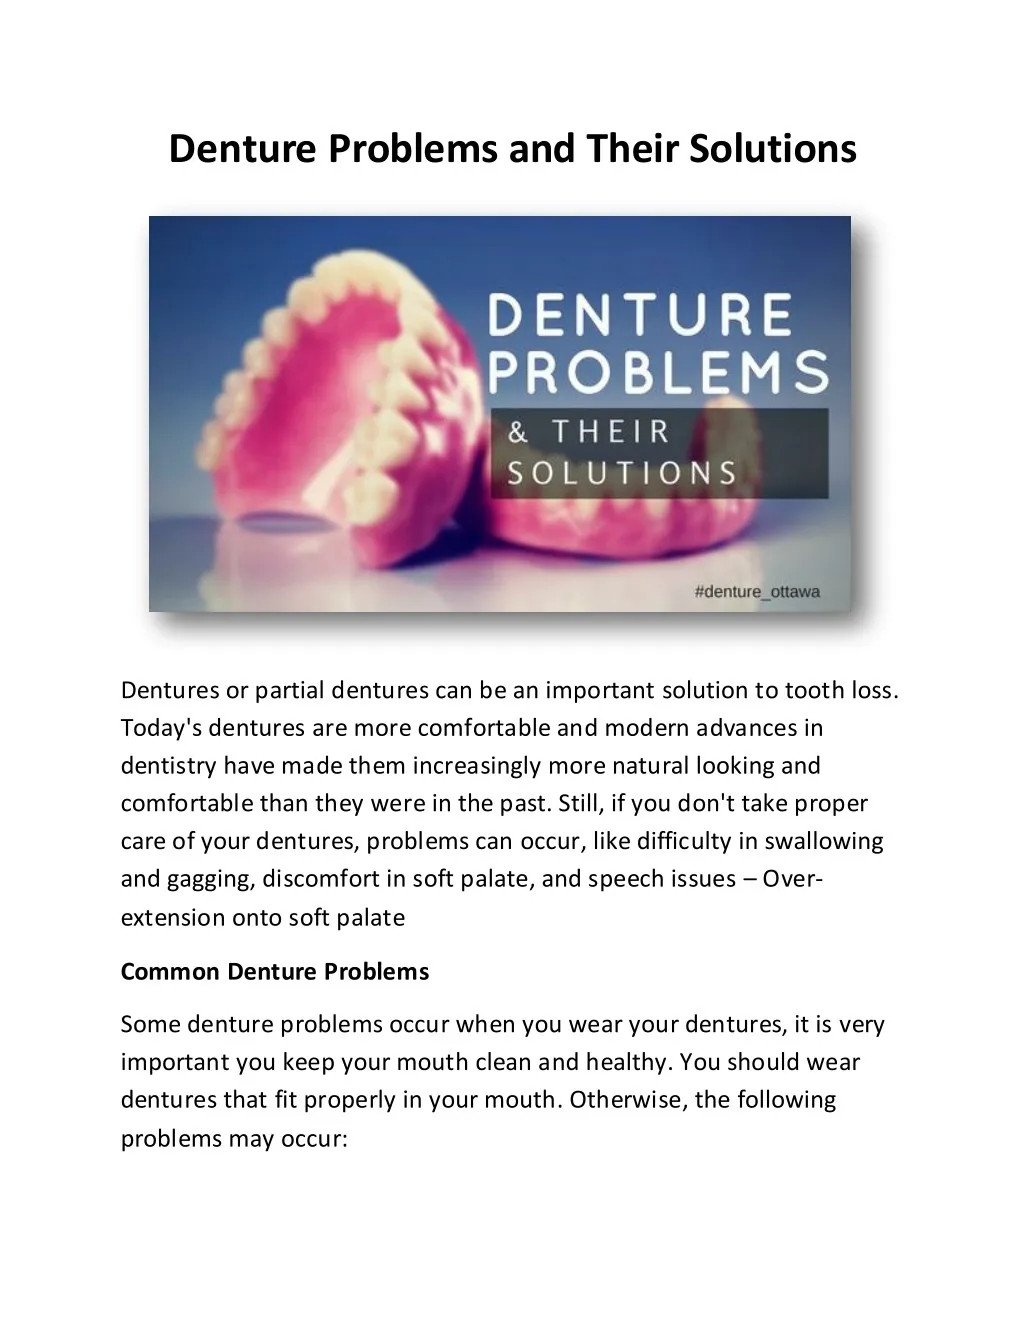 denture problems and their solutions